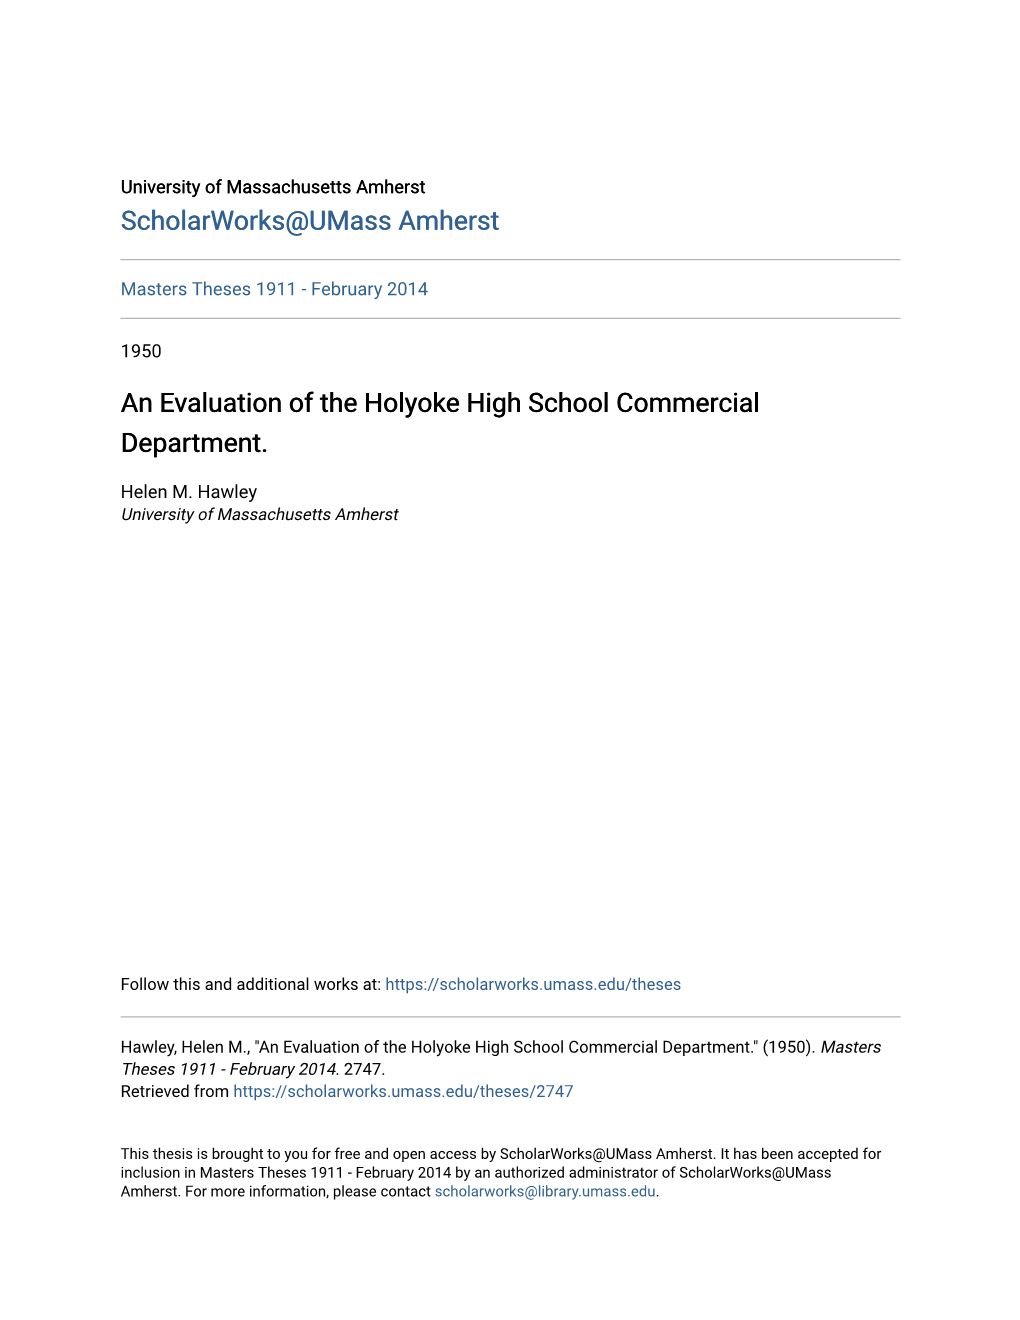 An Evaluation of the Holyoke High School Commercial Department